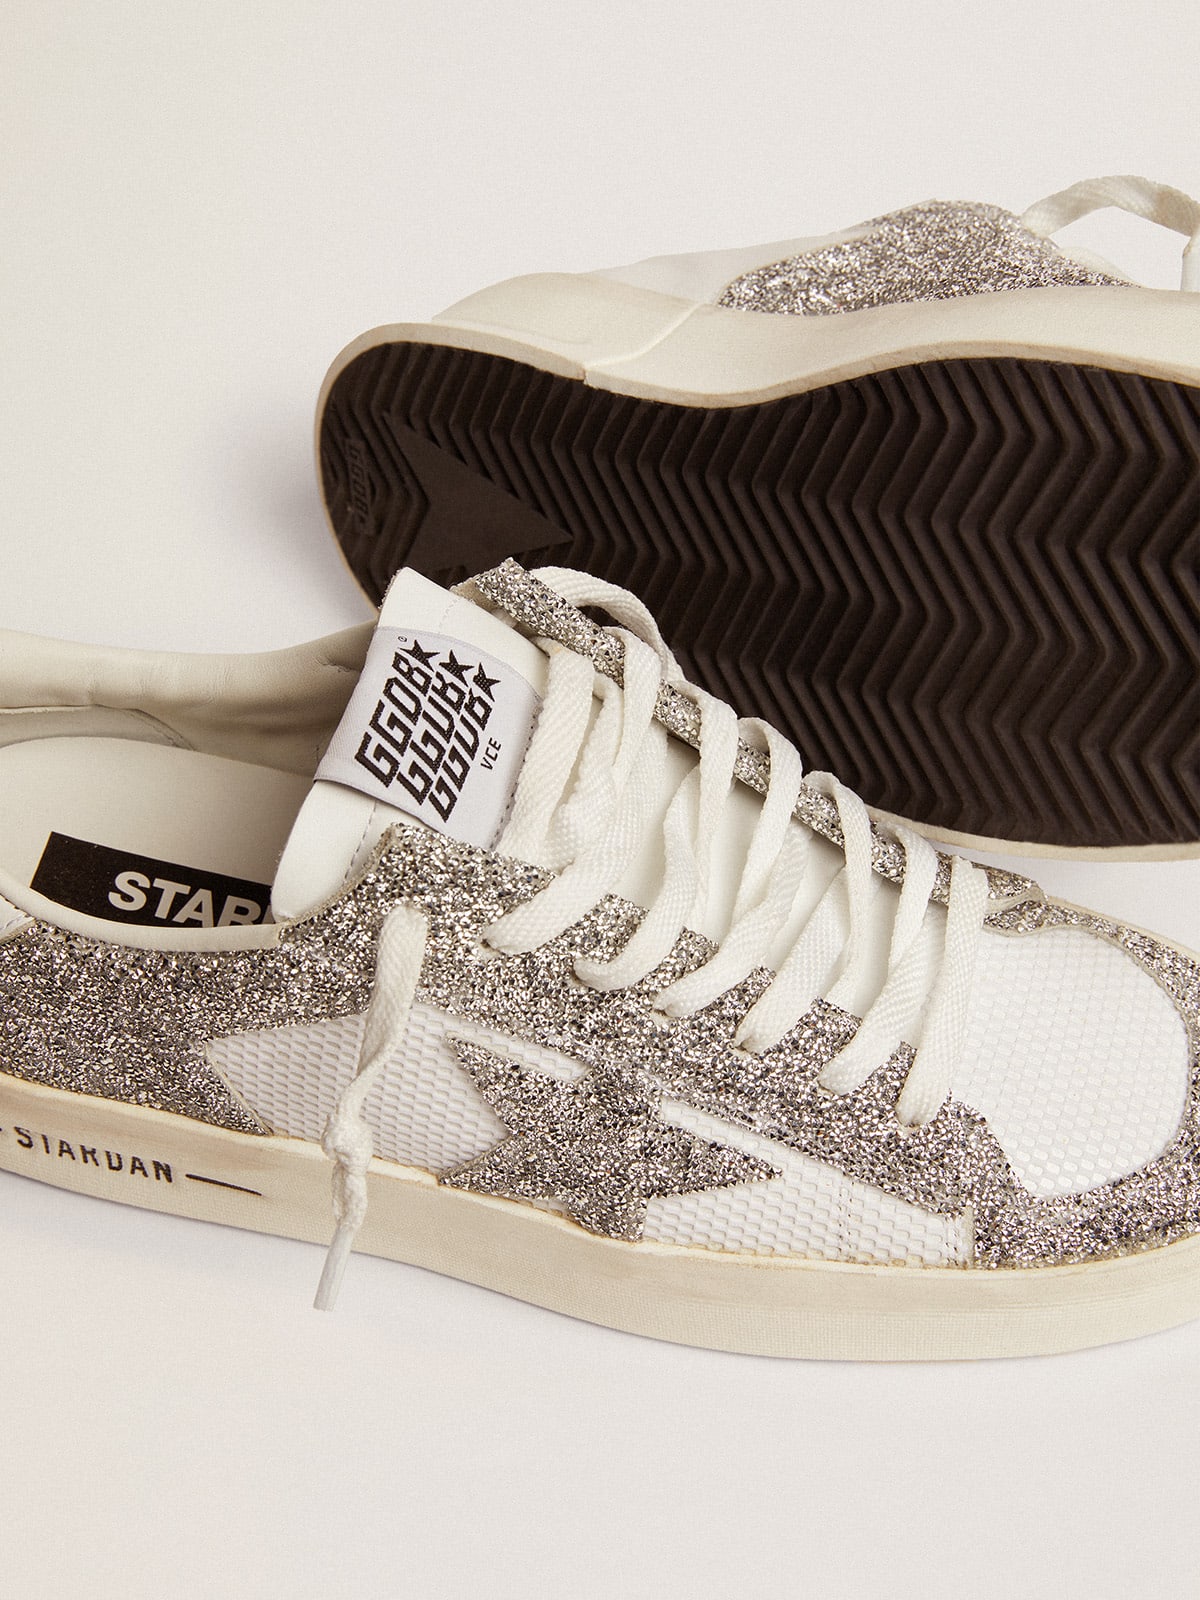 Stardan sneakers in white leather with silver crystals | Golden Goose